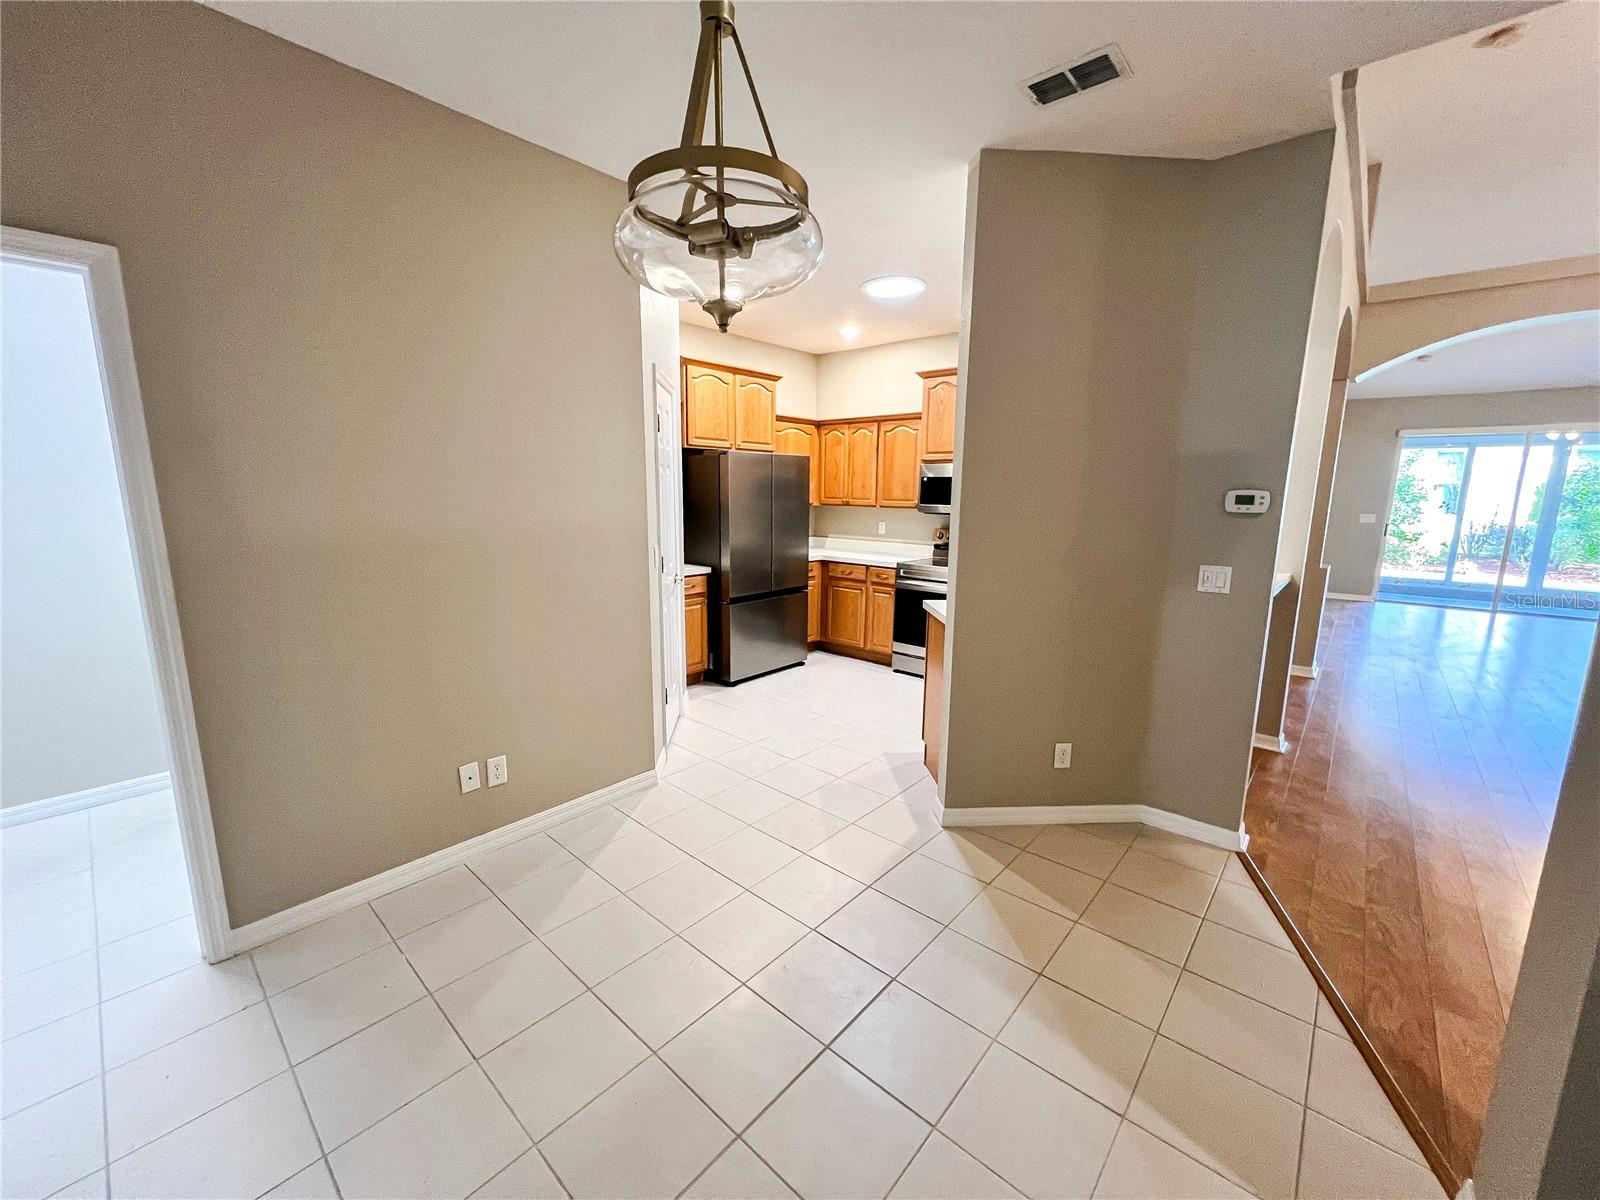 Enter from the one car garage into the Breakfast Nook with the laundry Room off to the side before you get to the kichen